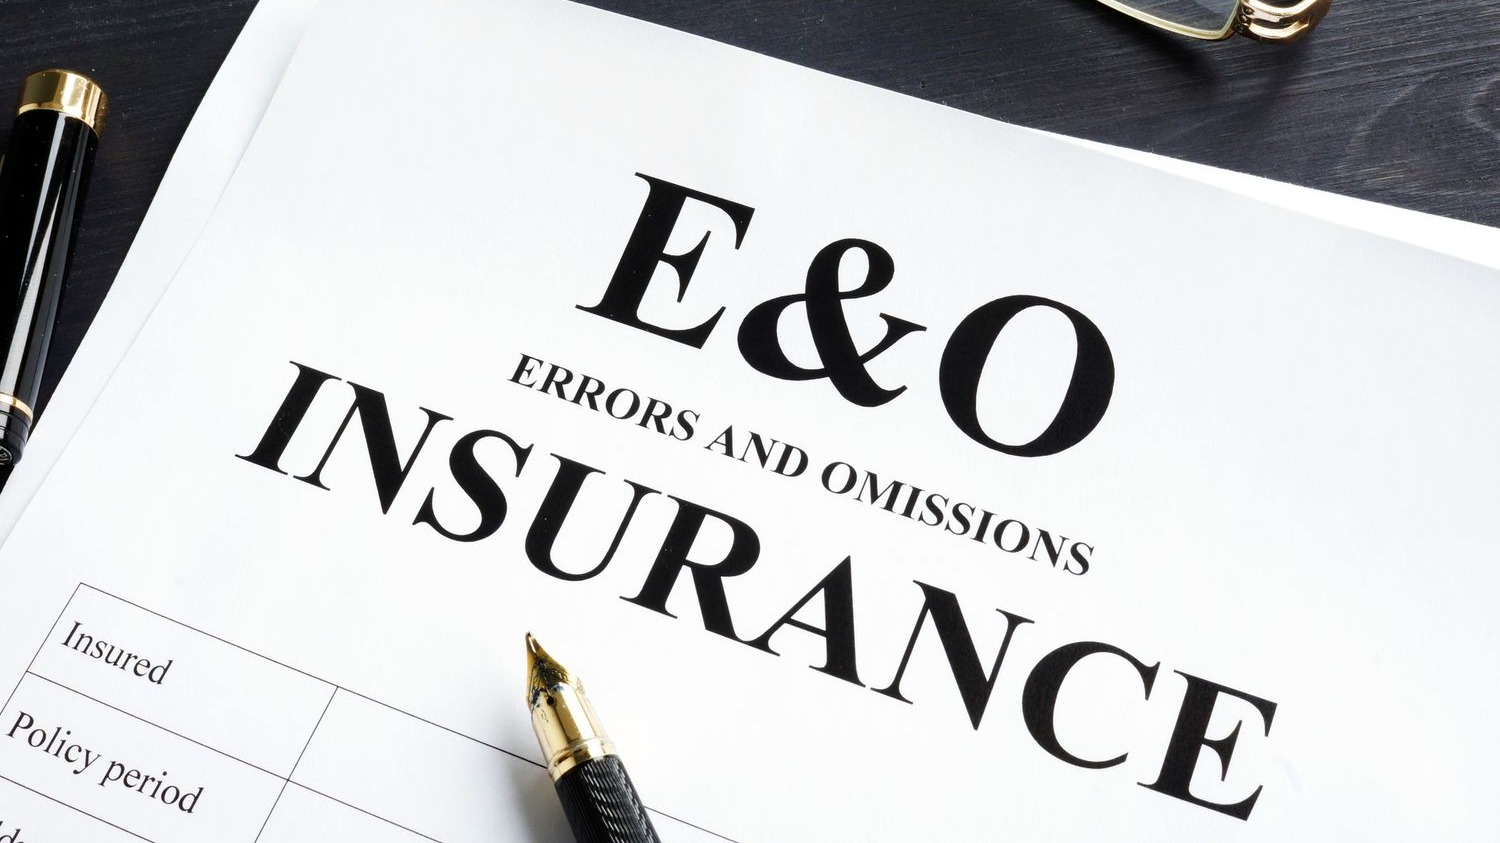 Errors & Omissions Insurance for Digital Assets